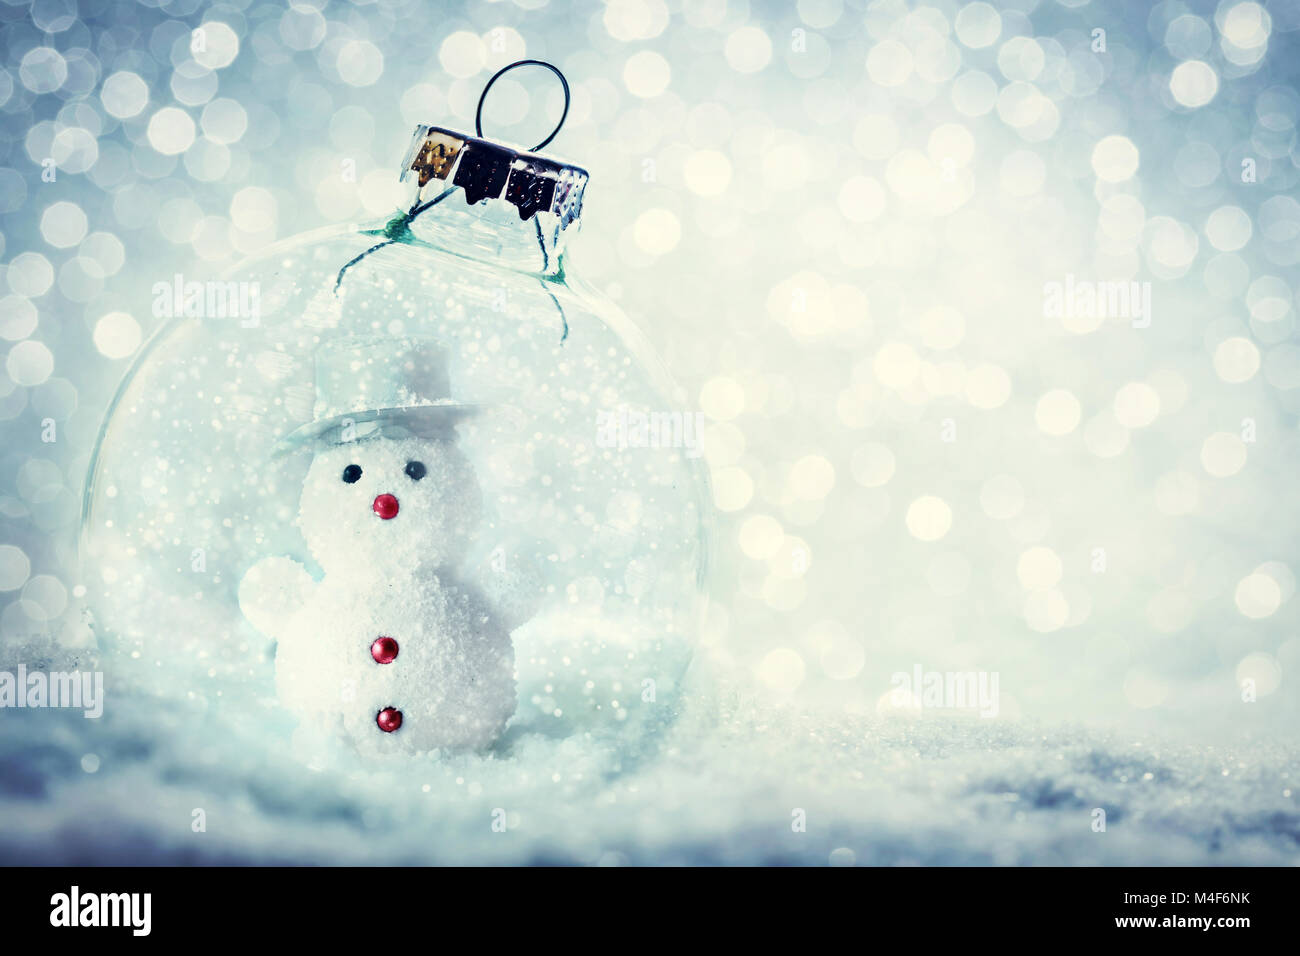 Close-up of Glitter Snow Shining Outdoors · Free Stock Photo